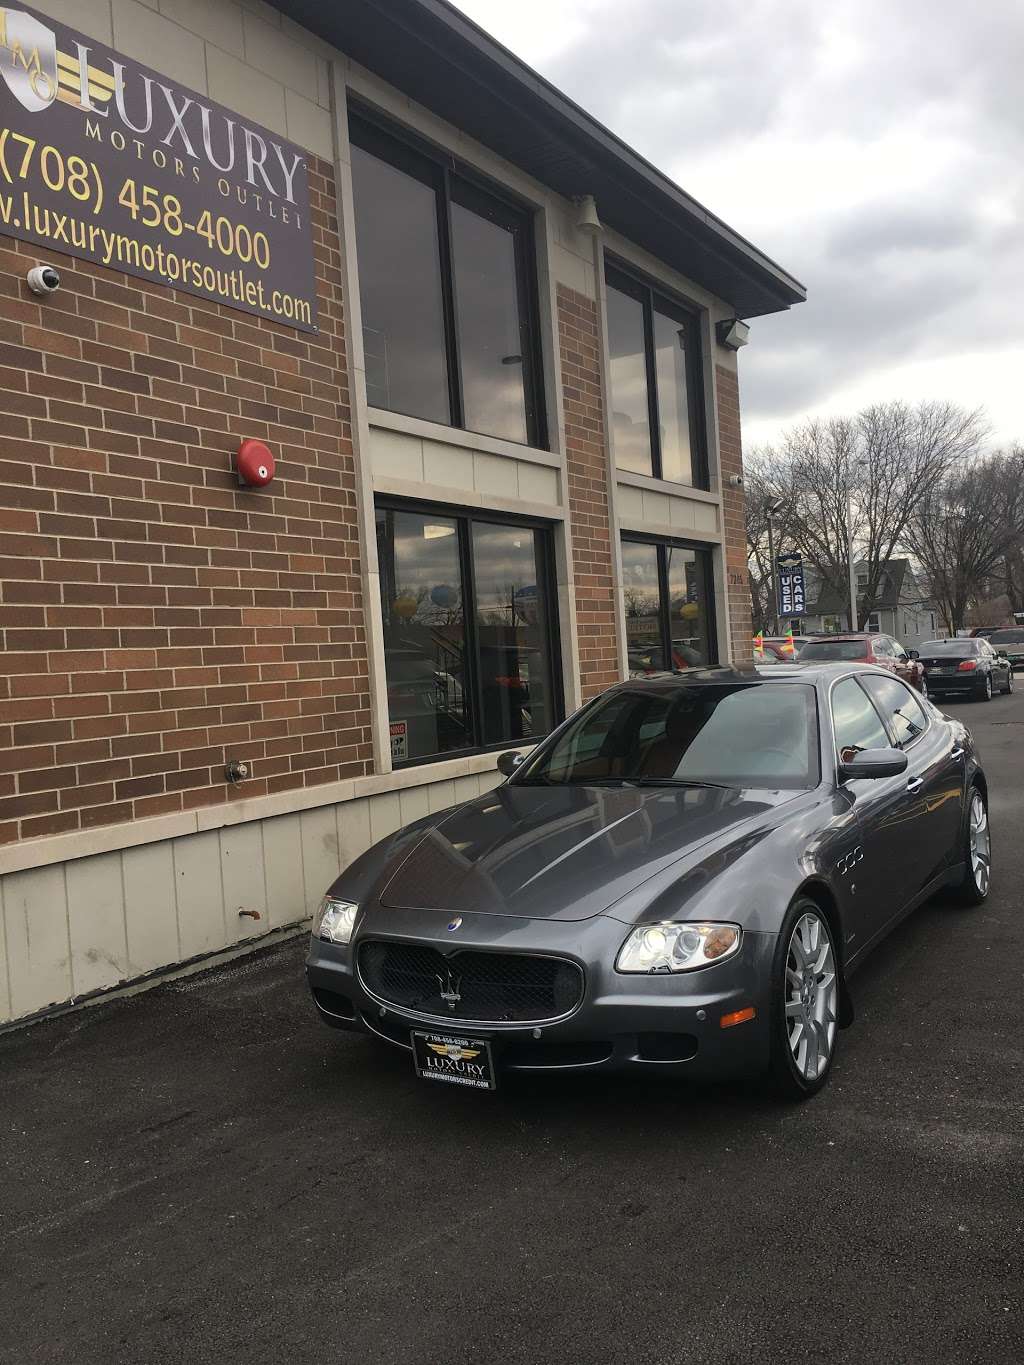 Luxury Motors Outlet | 7305 S Harlem Ave, Bridgeview, IL 60455, USA | Phone: (708) 458-4000